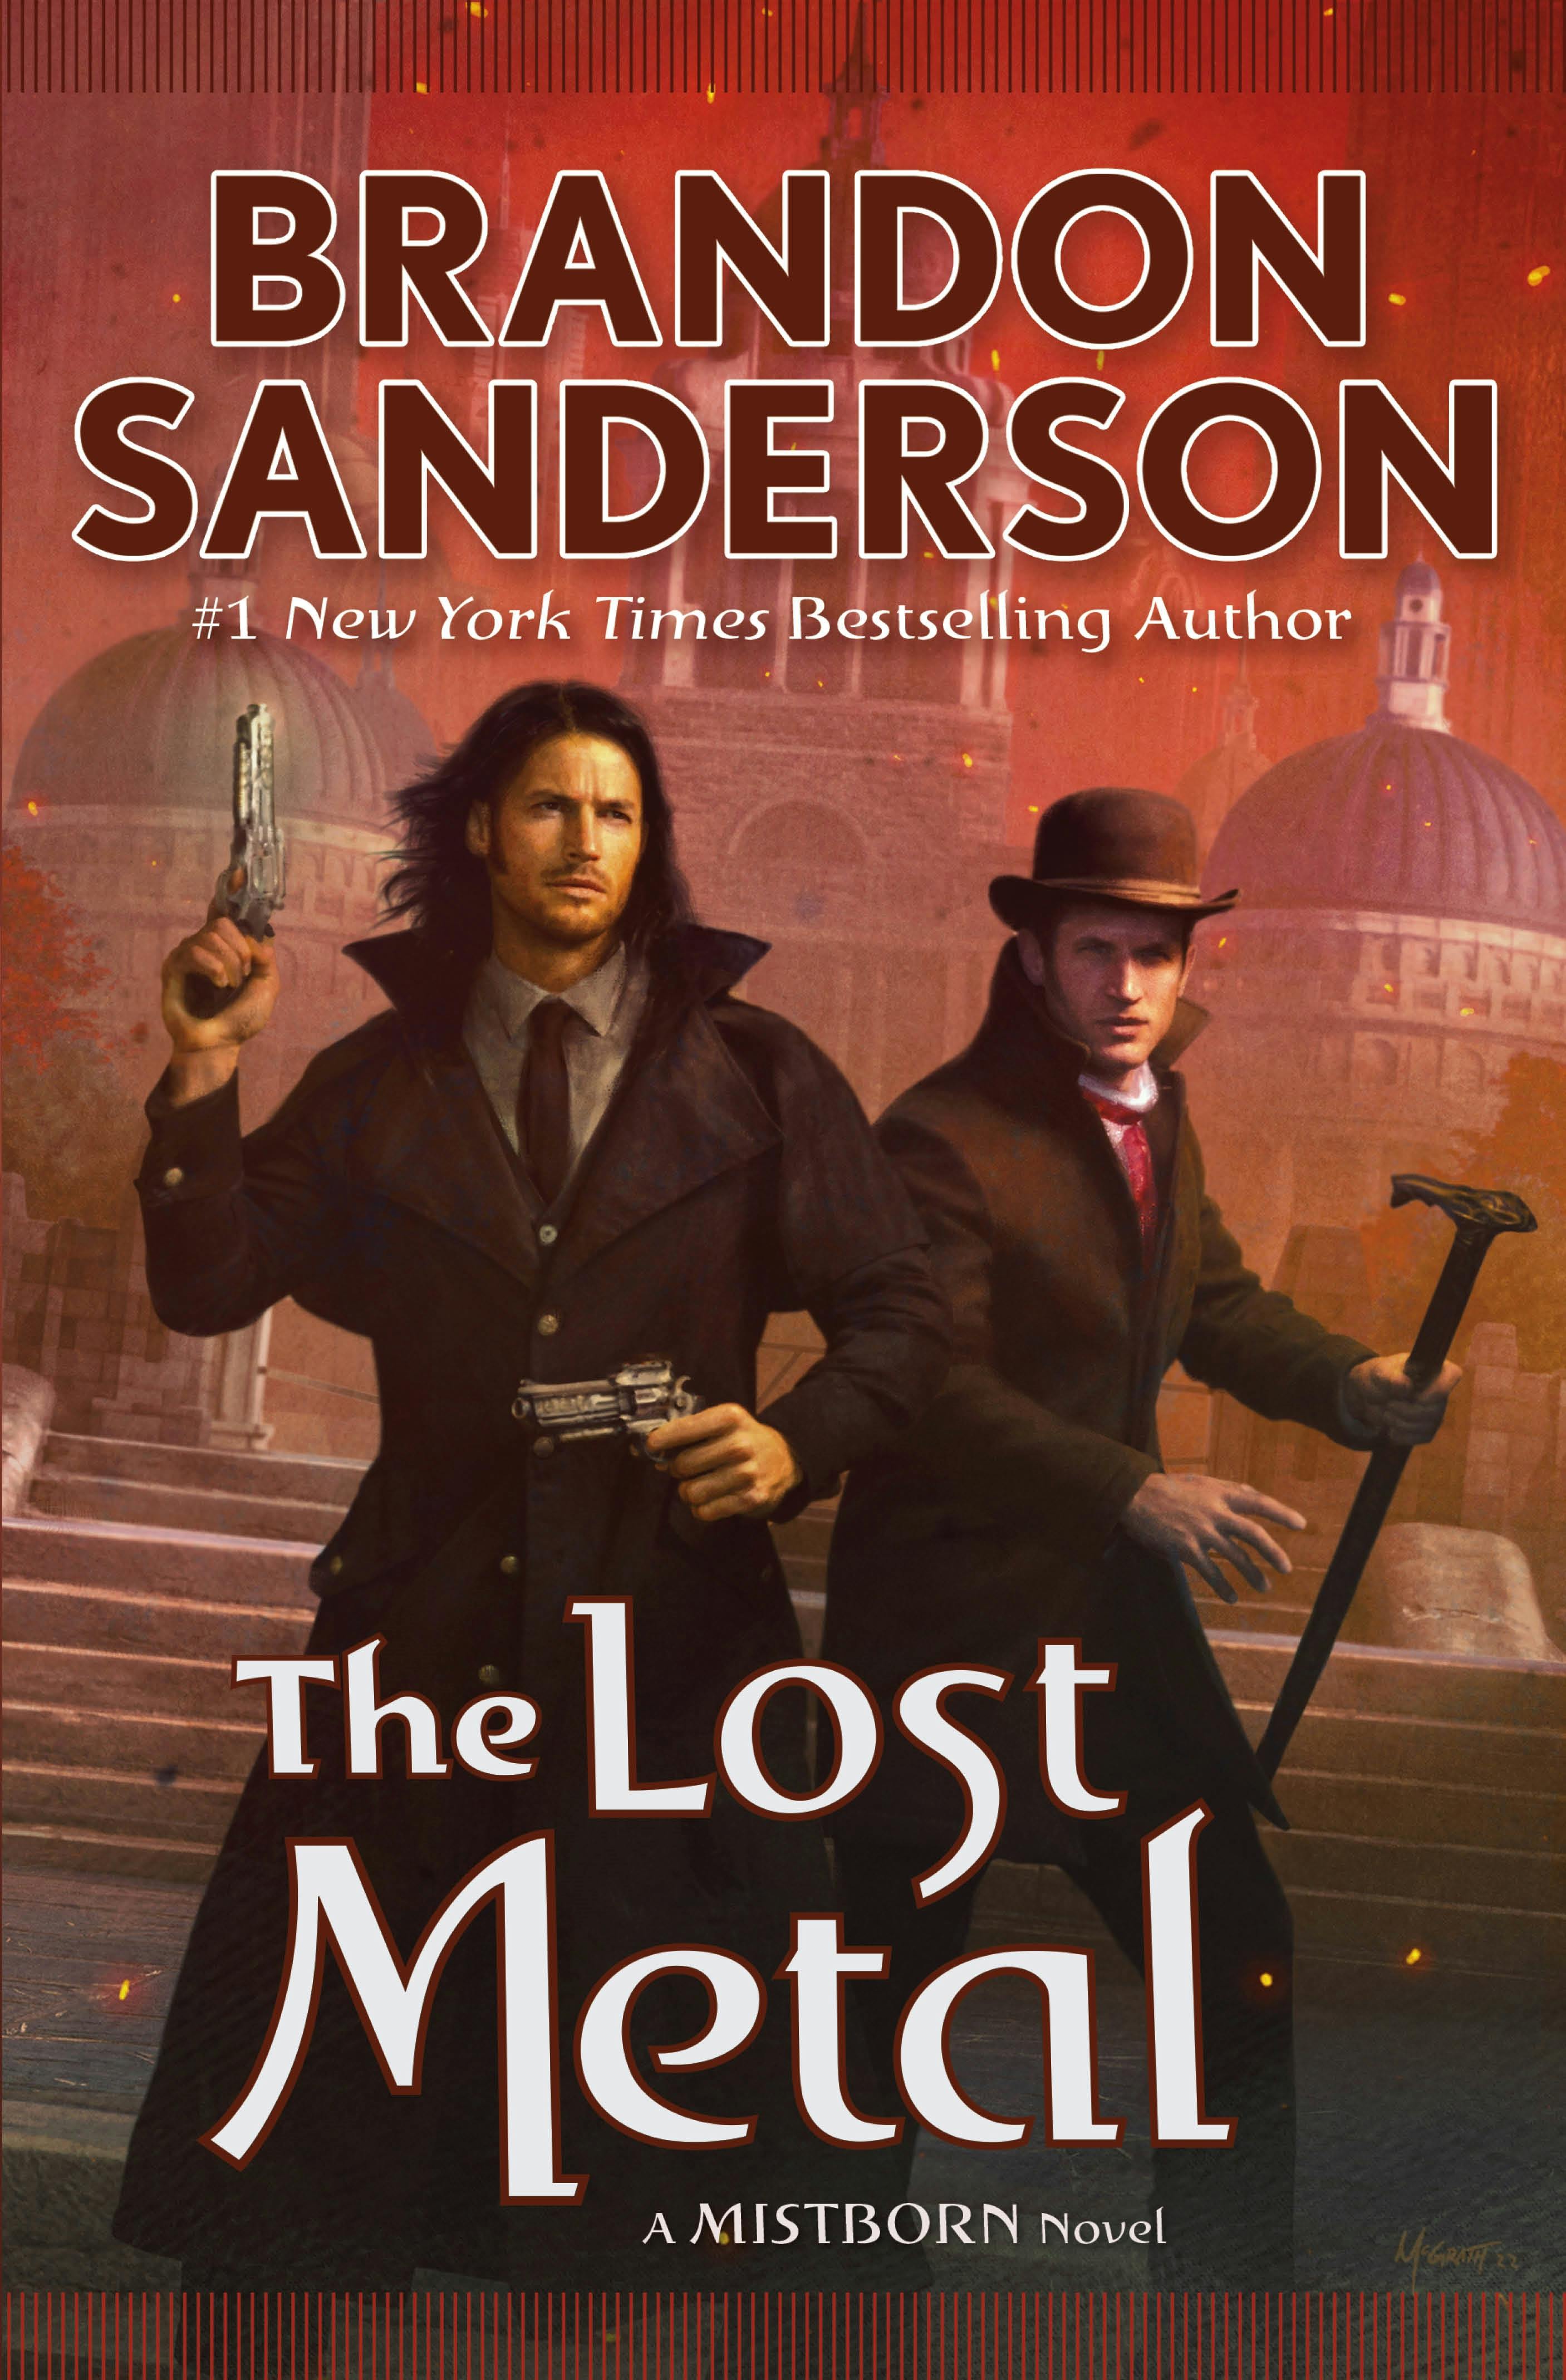 Cover for the book titled as: The Lost Metal